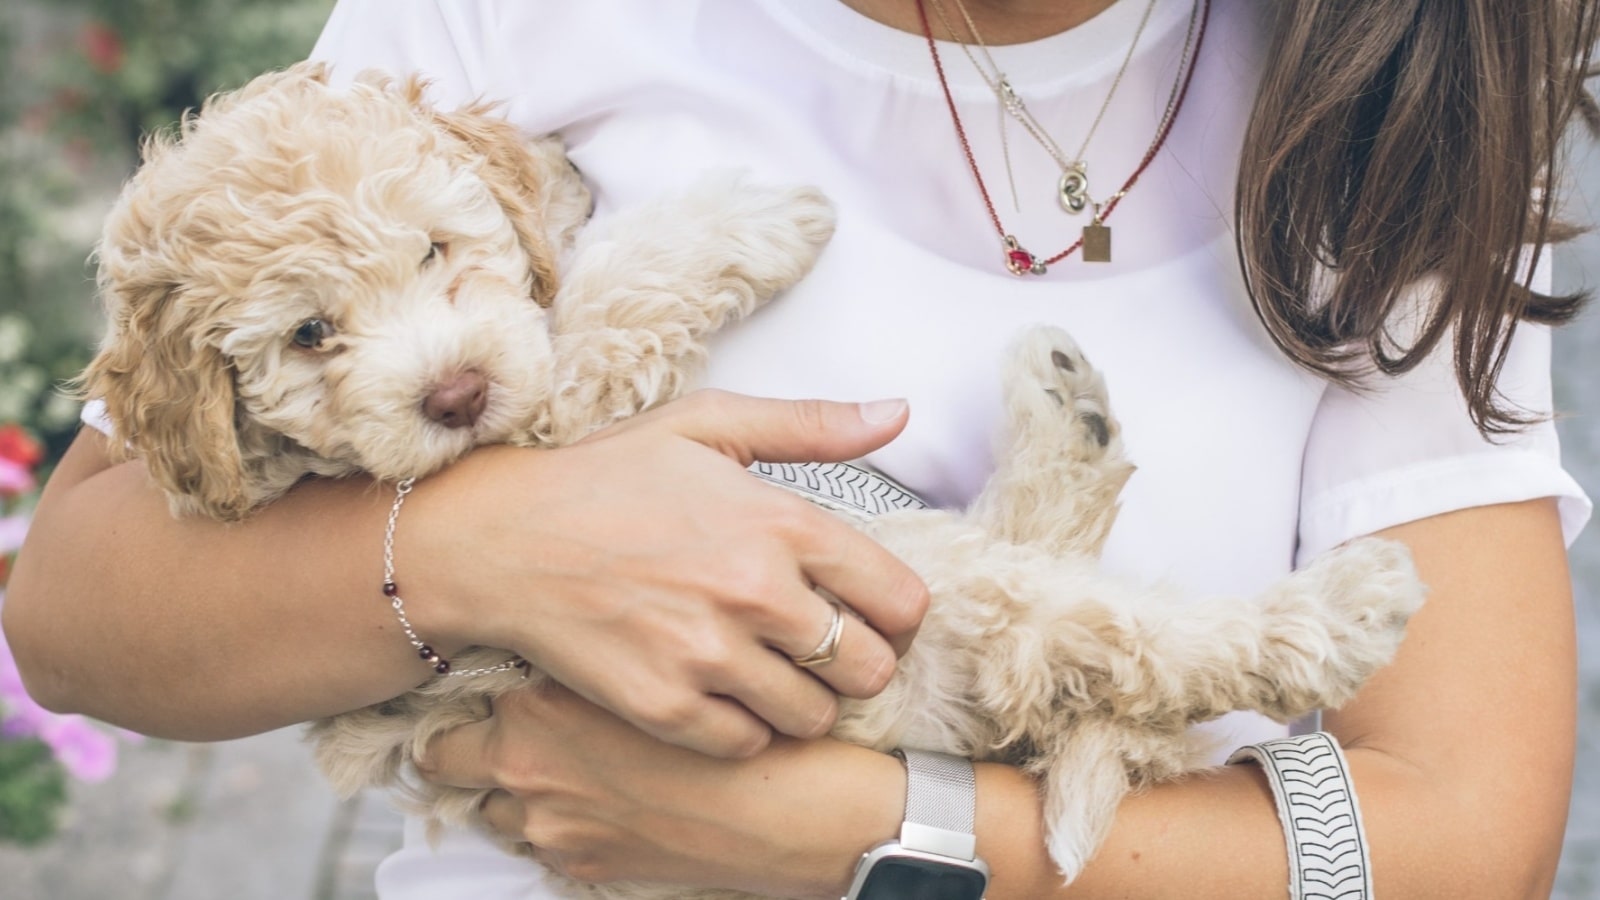 What CBD Oil Is Good For Dogs?